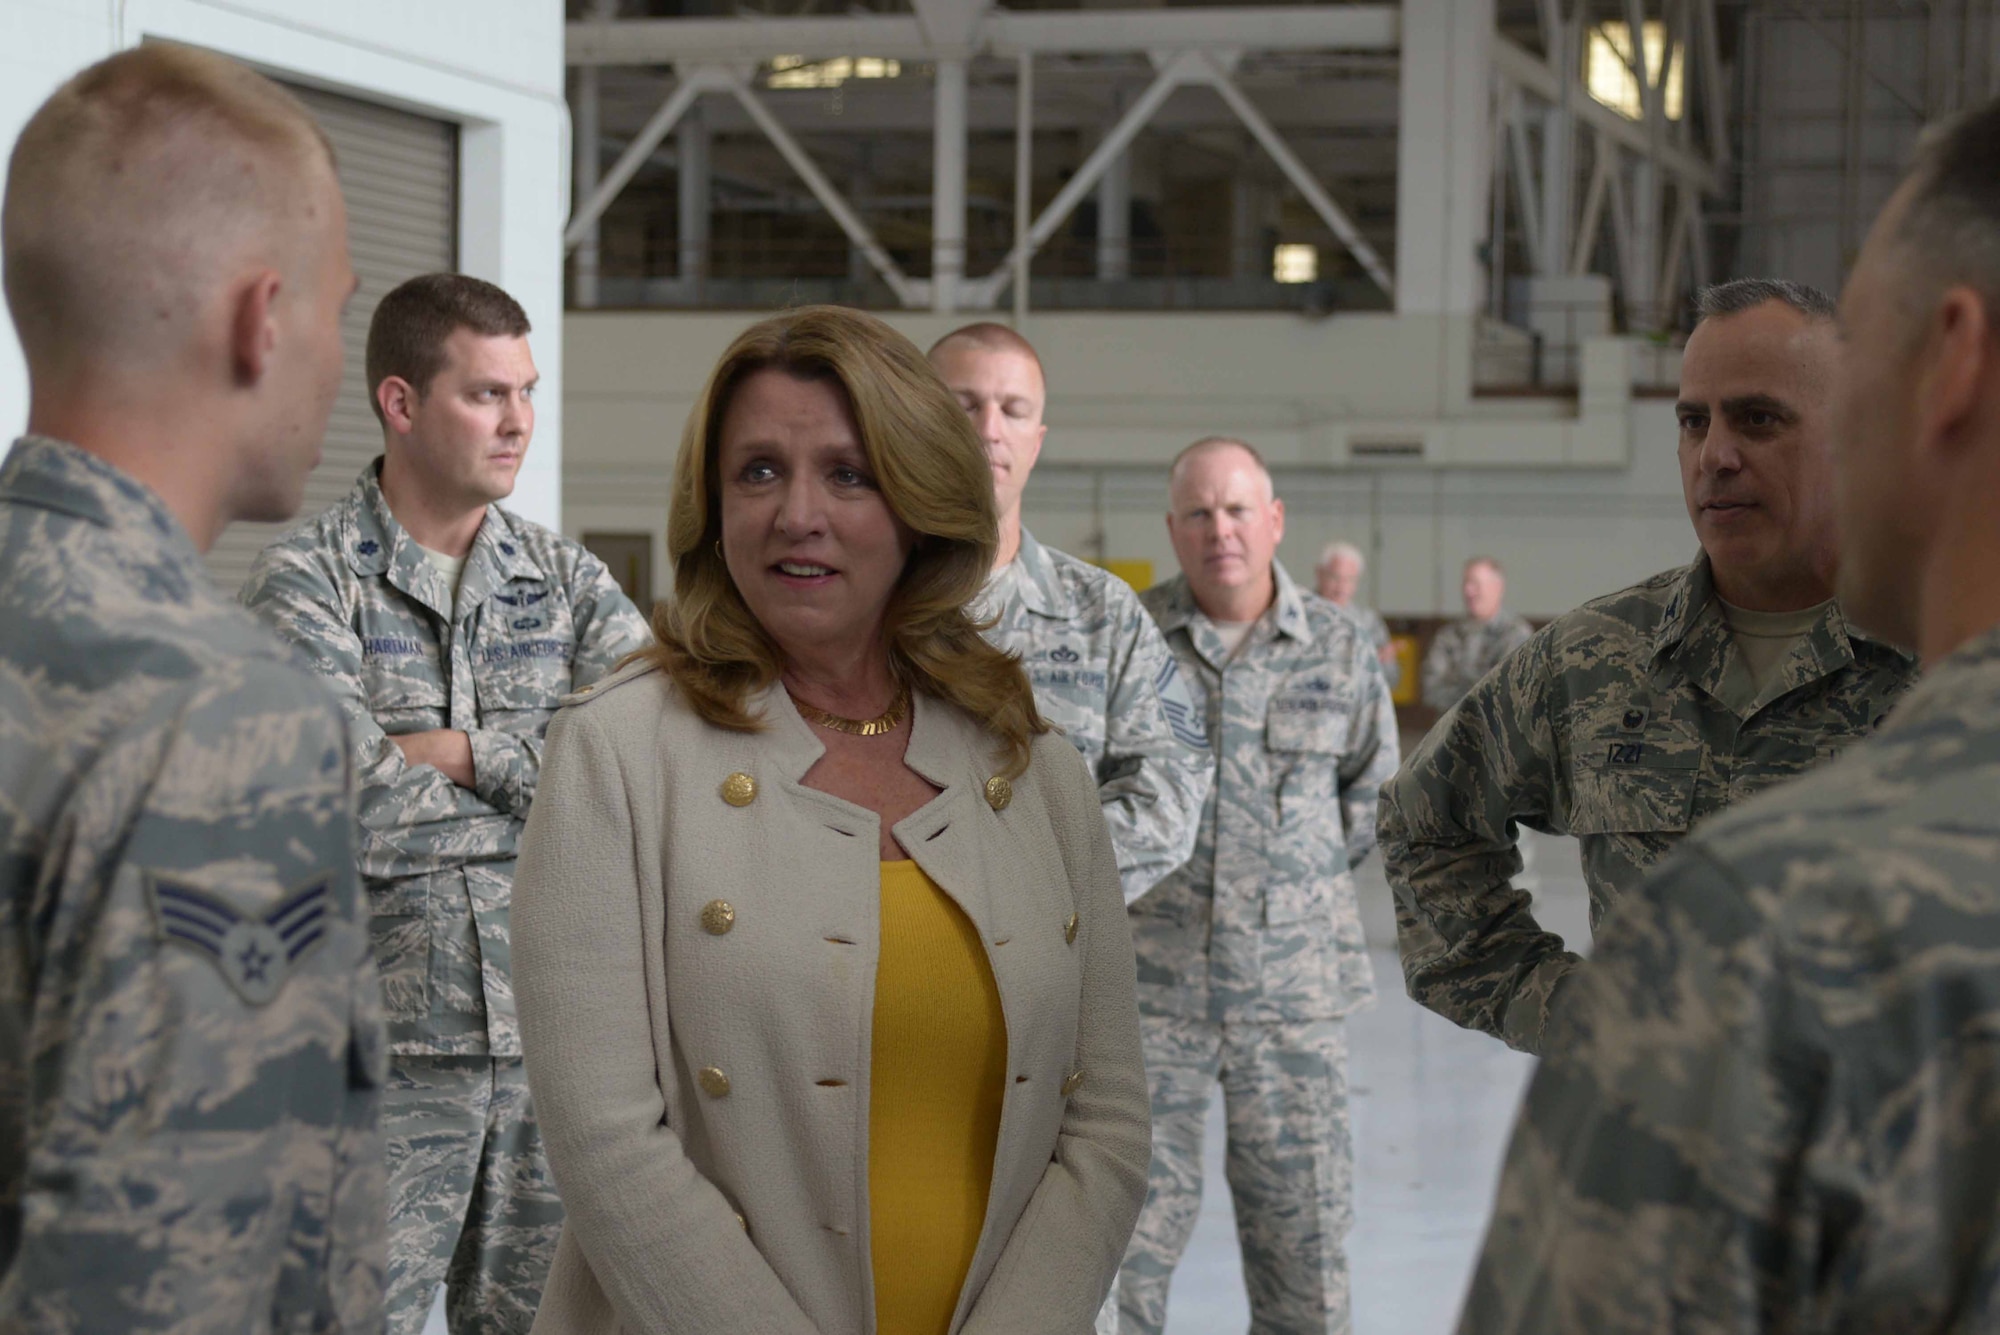 Secretary of the Air Force Deborah Lee James speaks with Airmen, July 29, 2016, at McConnell Air Force Base, Kan. A meet and greet with maintenance personnel was one of James’ first stops during her visit to McConnell. (U.S. Air Force photo/Airman 1st Class Christopher Thornbury)